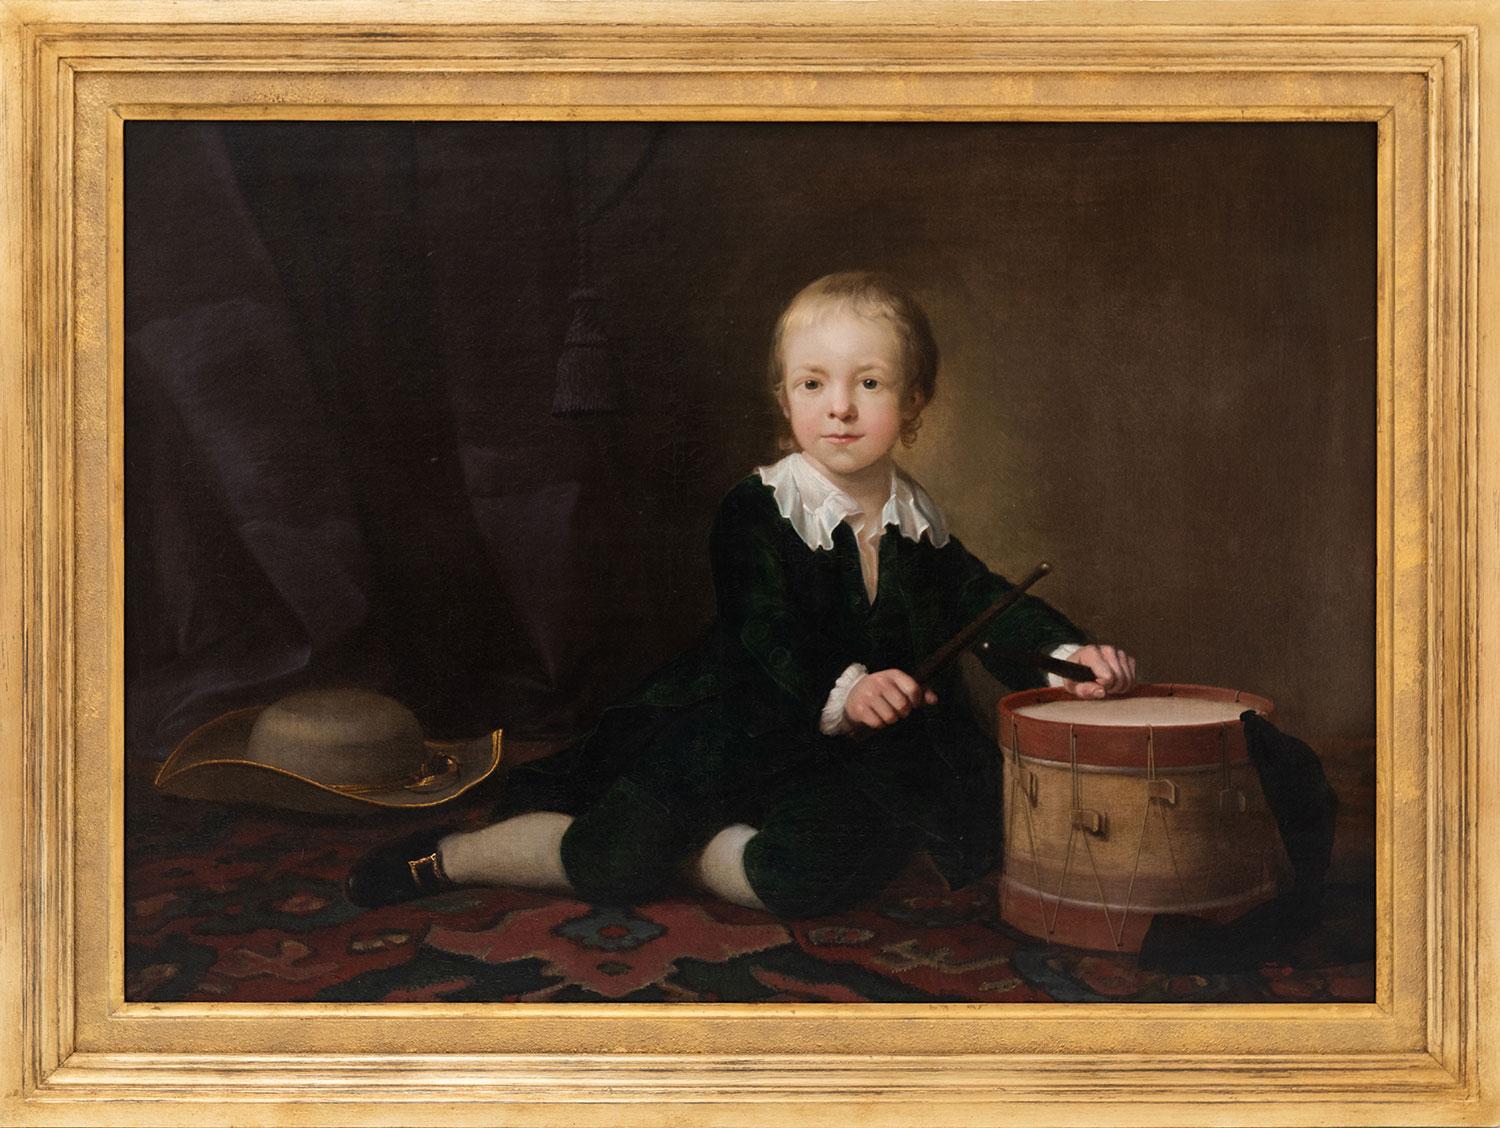 18th Century Portrait of Daniel Giles as a boy, playing with his drum. - Painting by Katherine Read